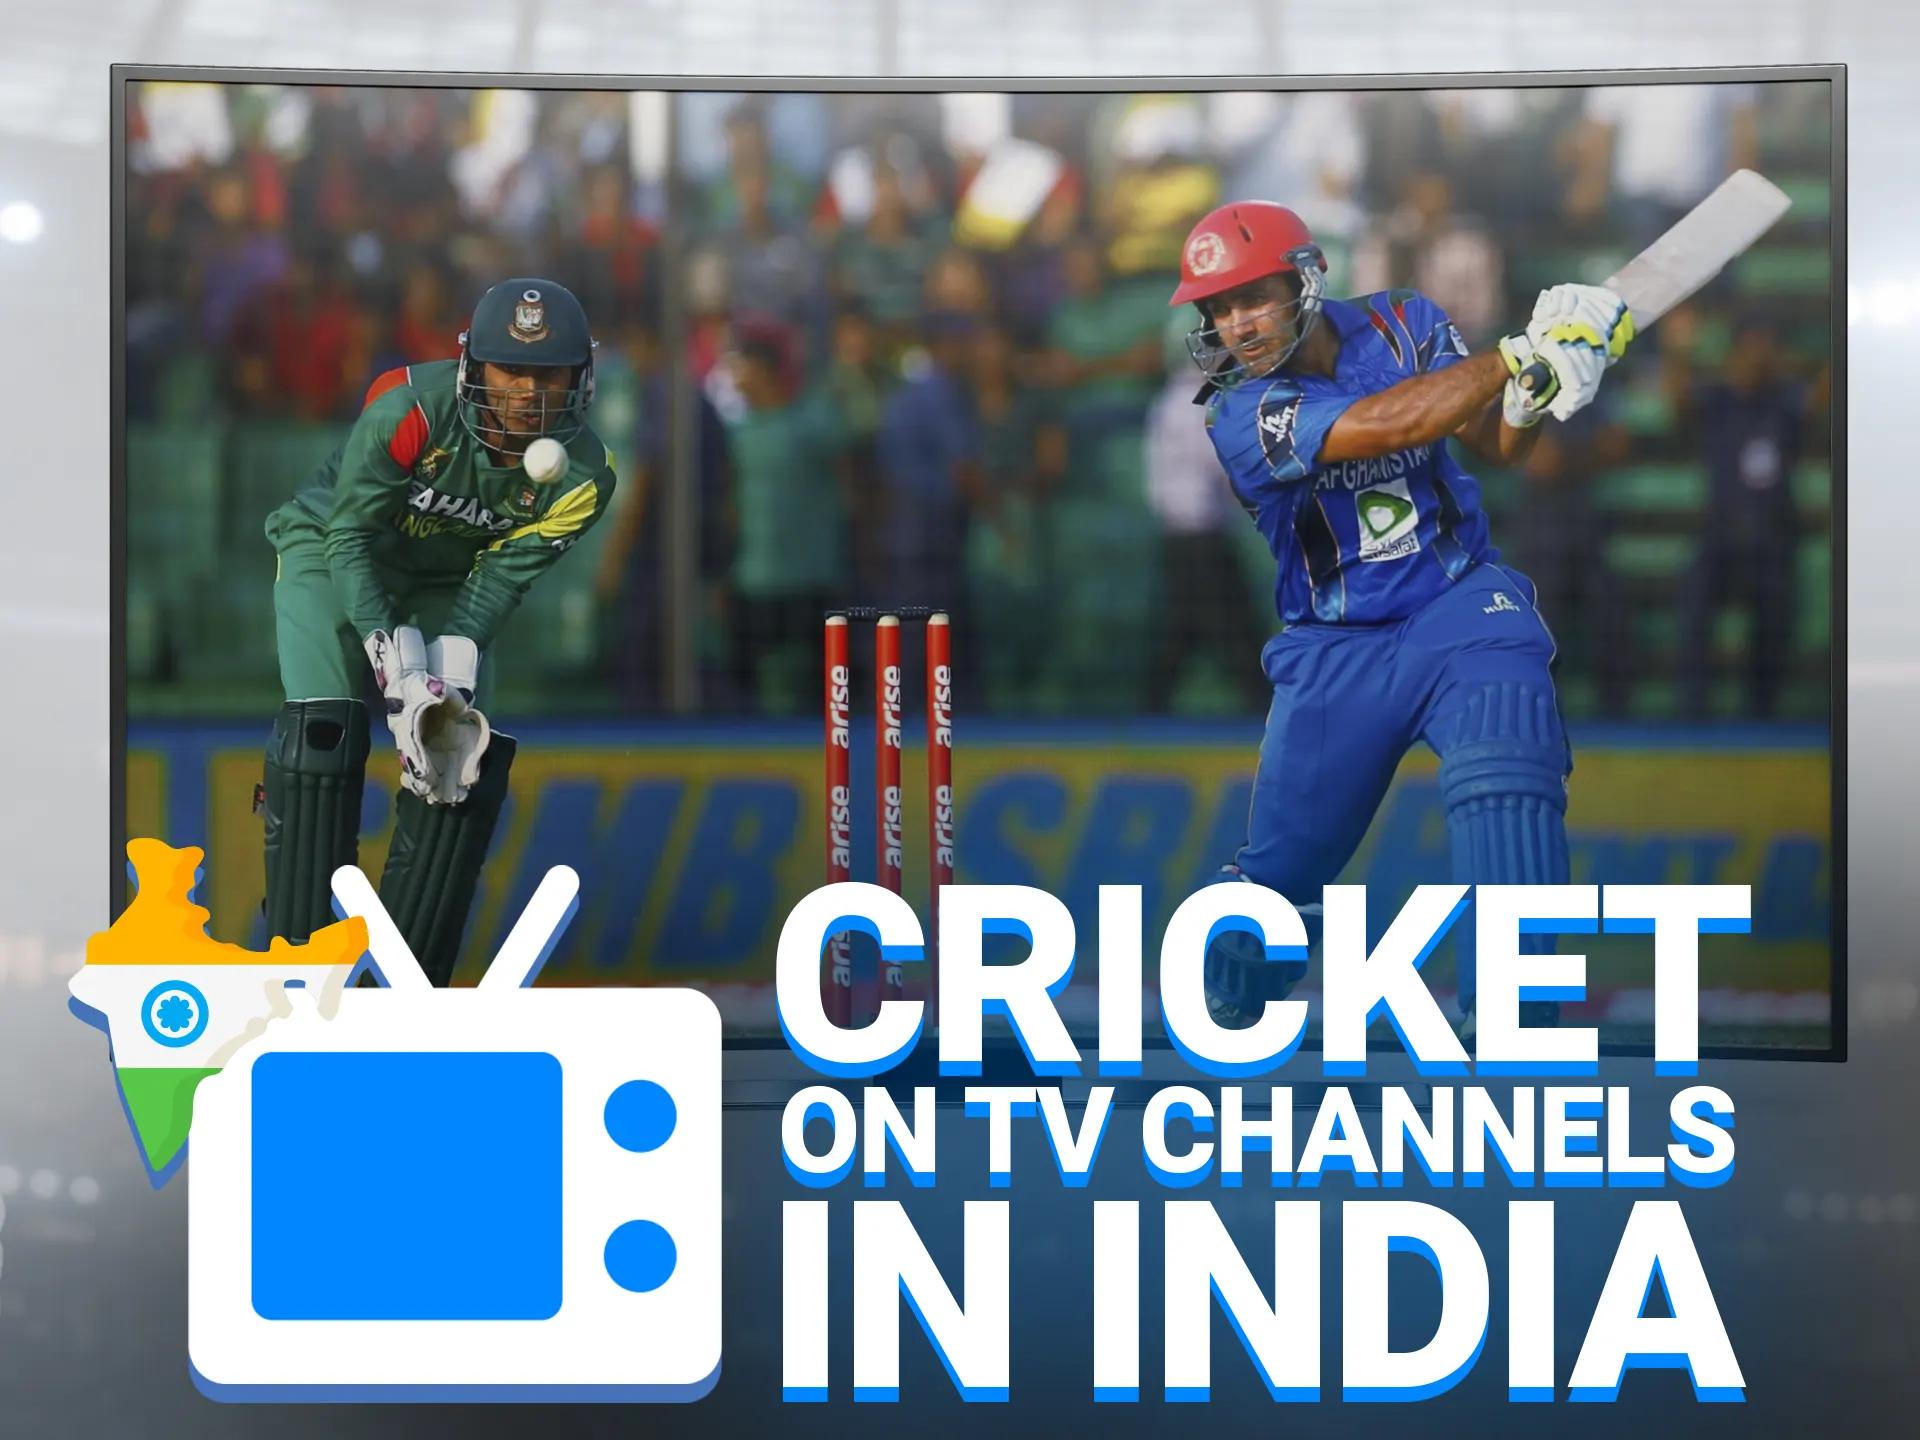 Check out the list of TV channels to watch all the best cricket matches from around the world in high quality.